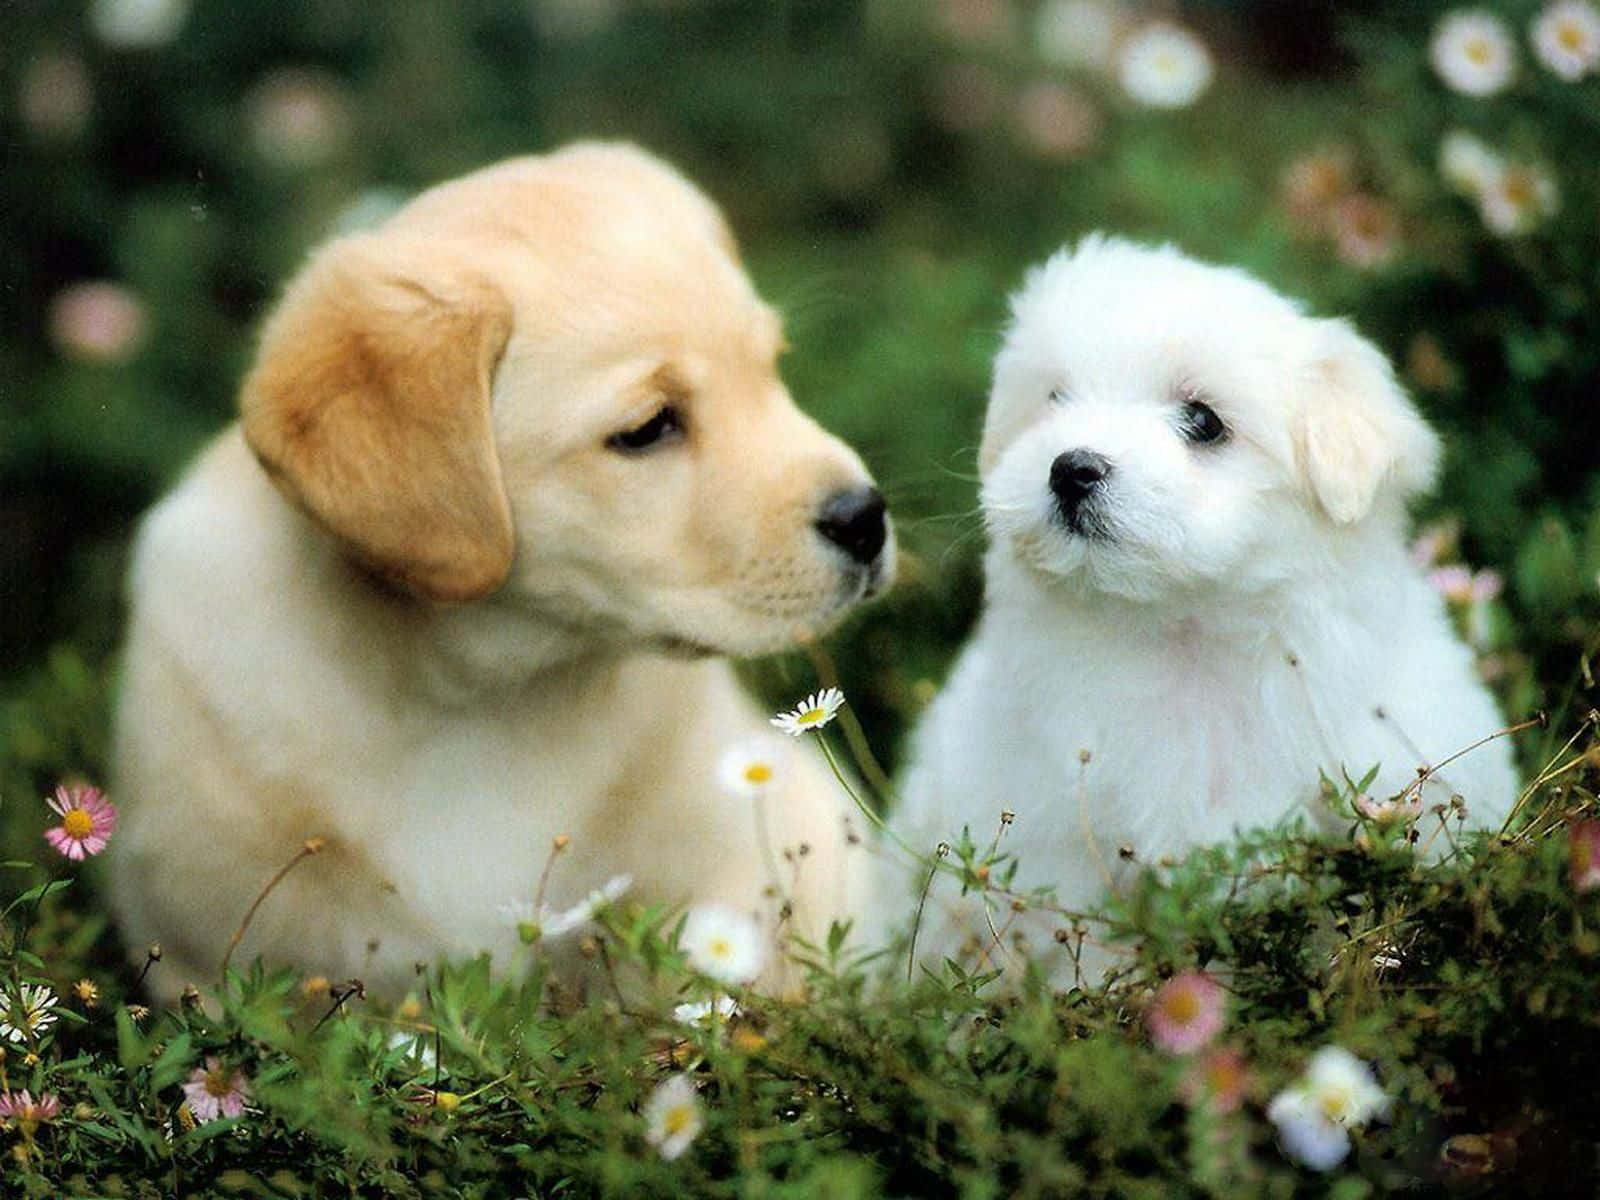 "These adorable puppies will warm your heart with their sweet faces!"